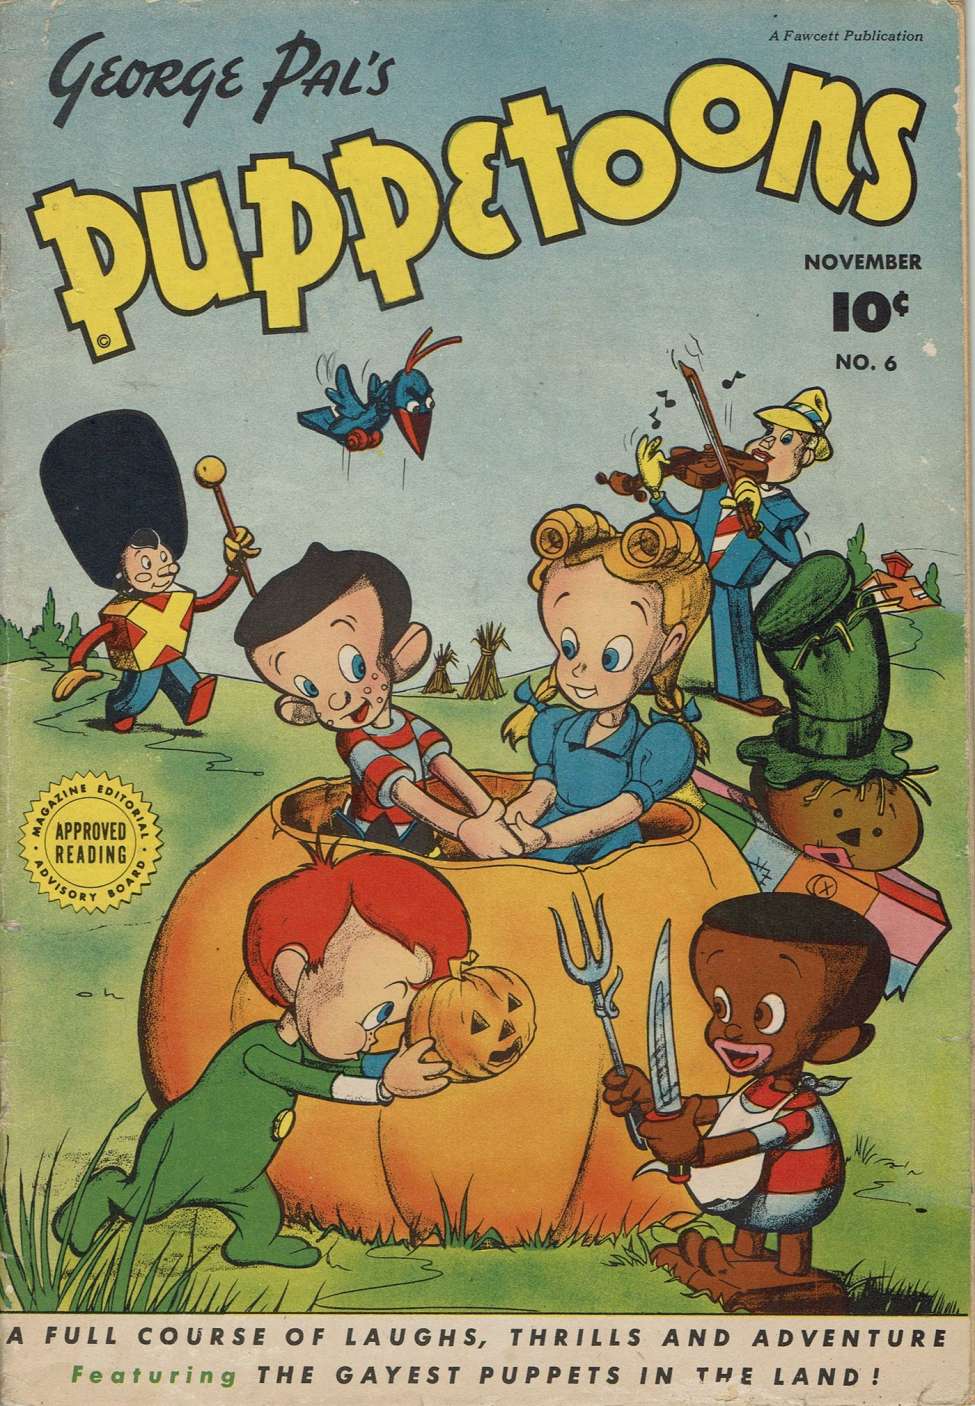 Book Cover For George Pal's Puppetoons 6